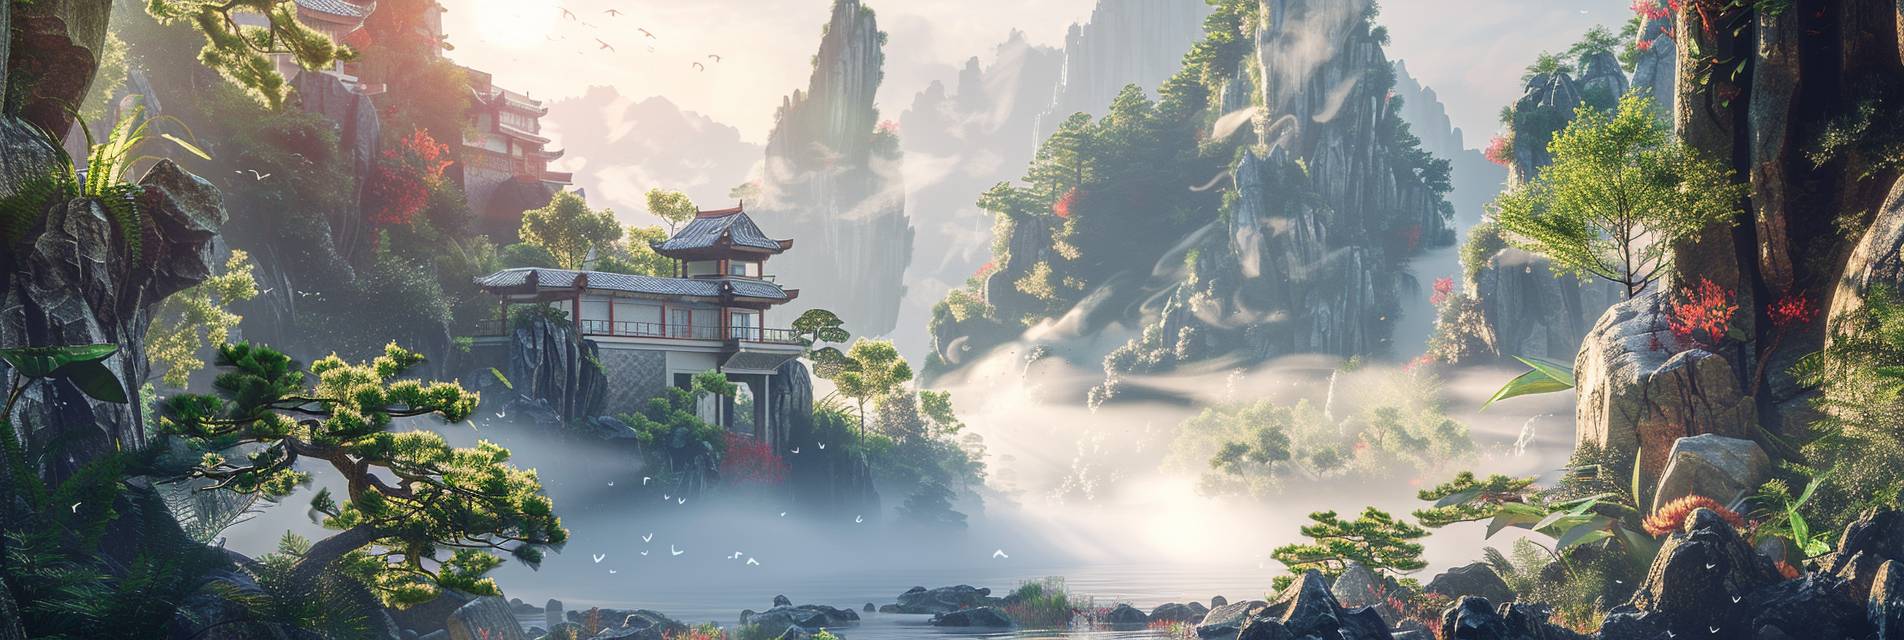 Beautiful Oriental fantasy, full of sunlight, fine details, hyper quality, architectural visualization, mist-shrouded, Chinese architecture, Mountains and rocks, Sunshine, Botany, isometric, c4d, 4k, 8k